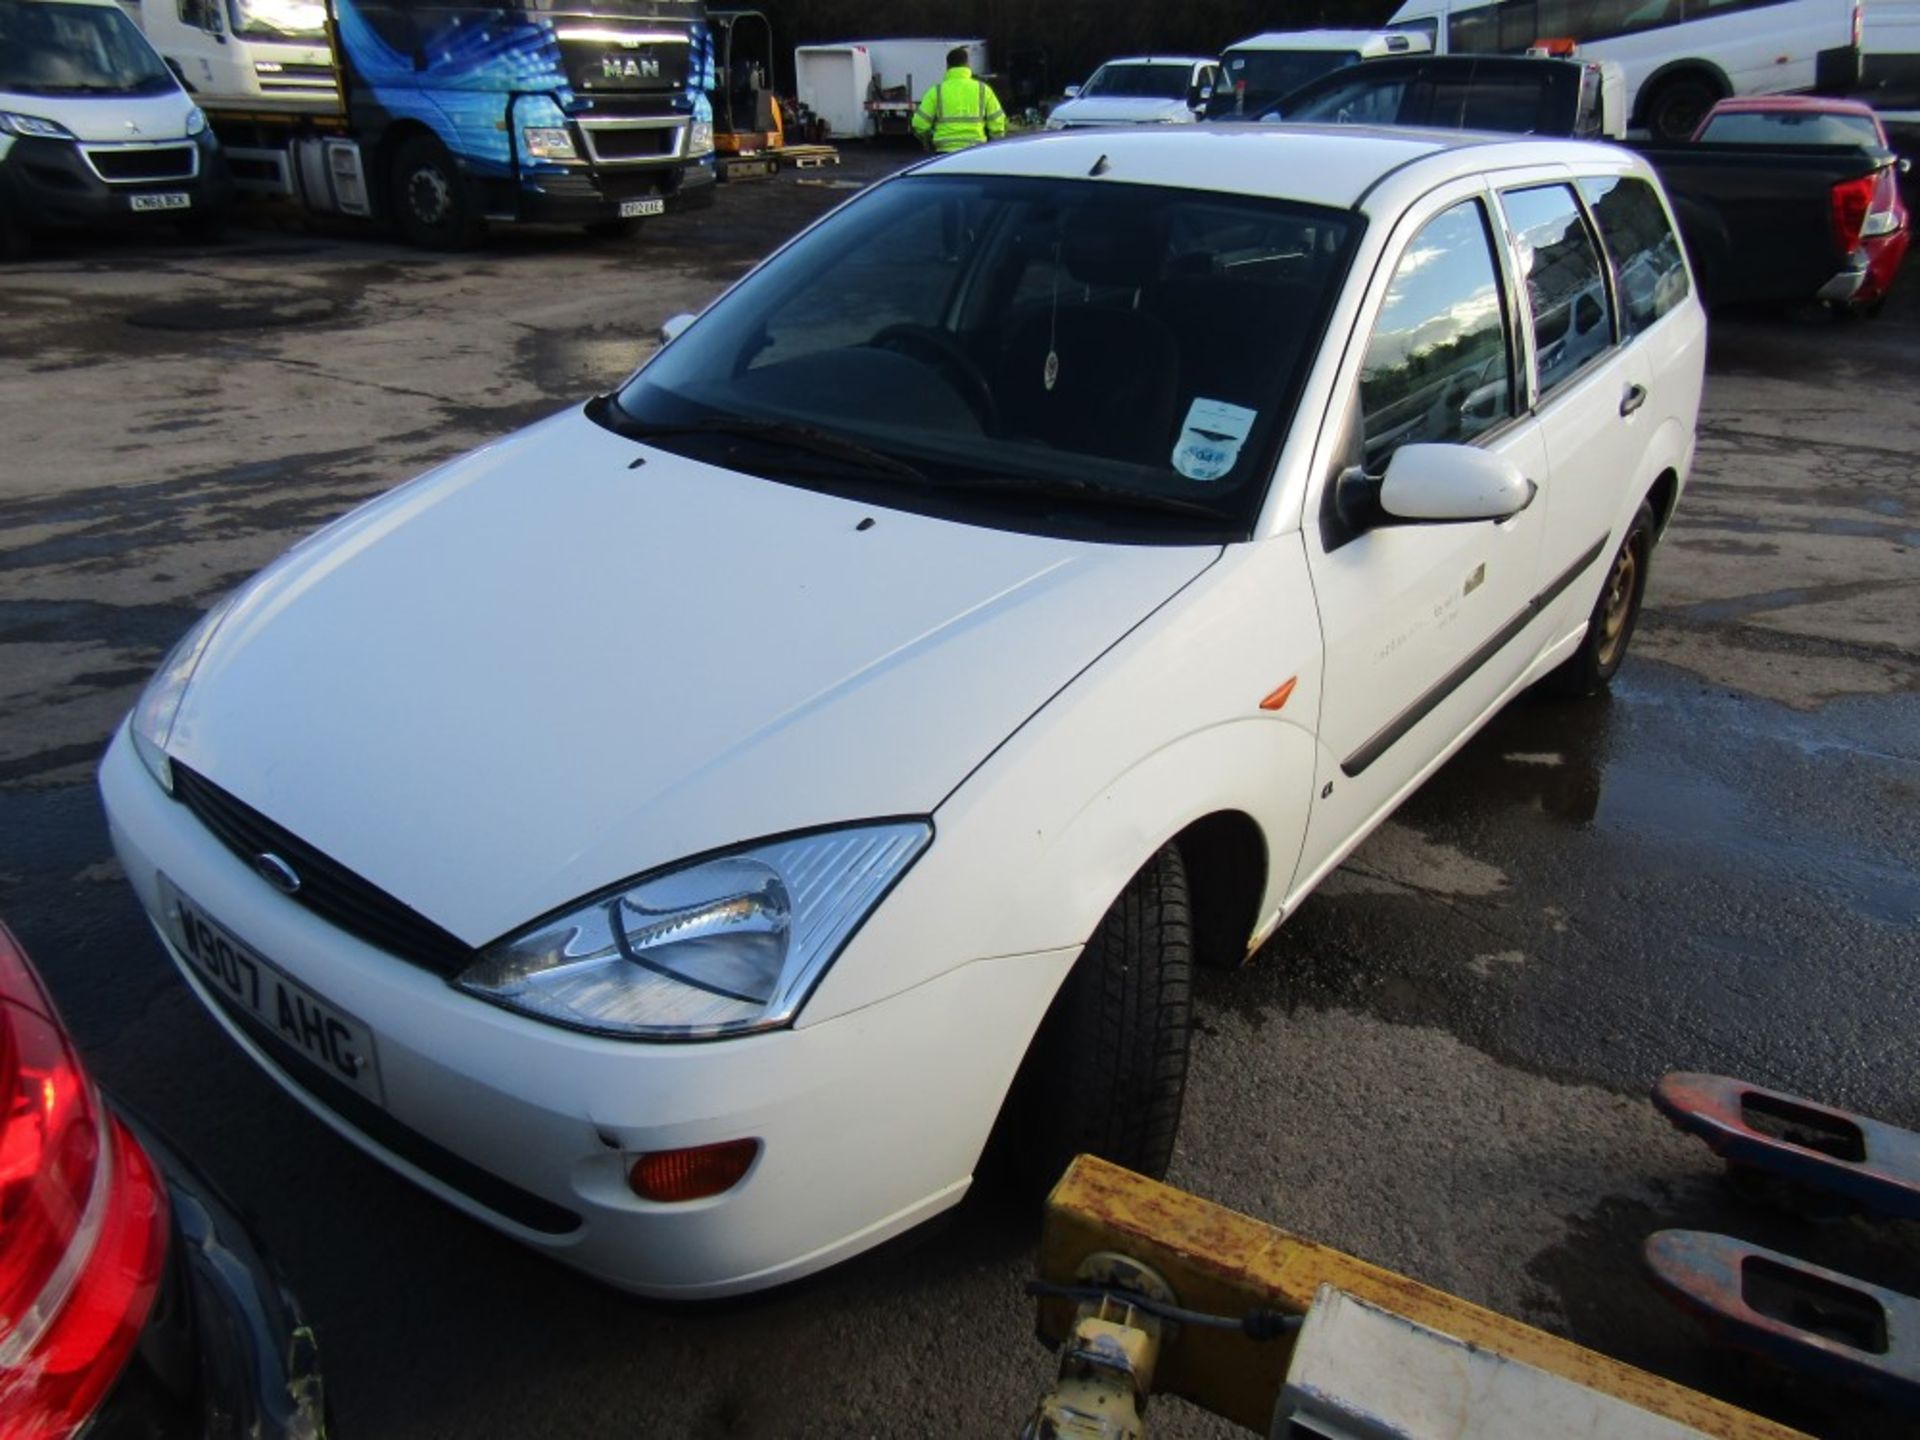 W reg FORD FOCUS CL TD DI ESTATE, 1ST REG 05/00, 145820M WARRANTED, V5 HERE, 2 FORMER KEEPERS [NO - Image 2 of 6